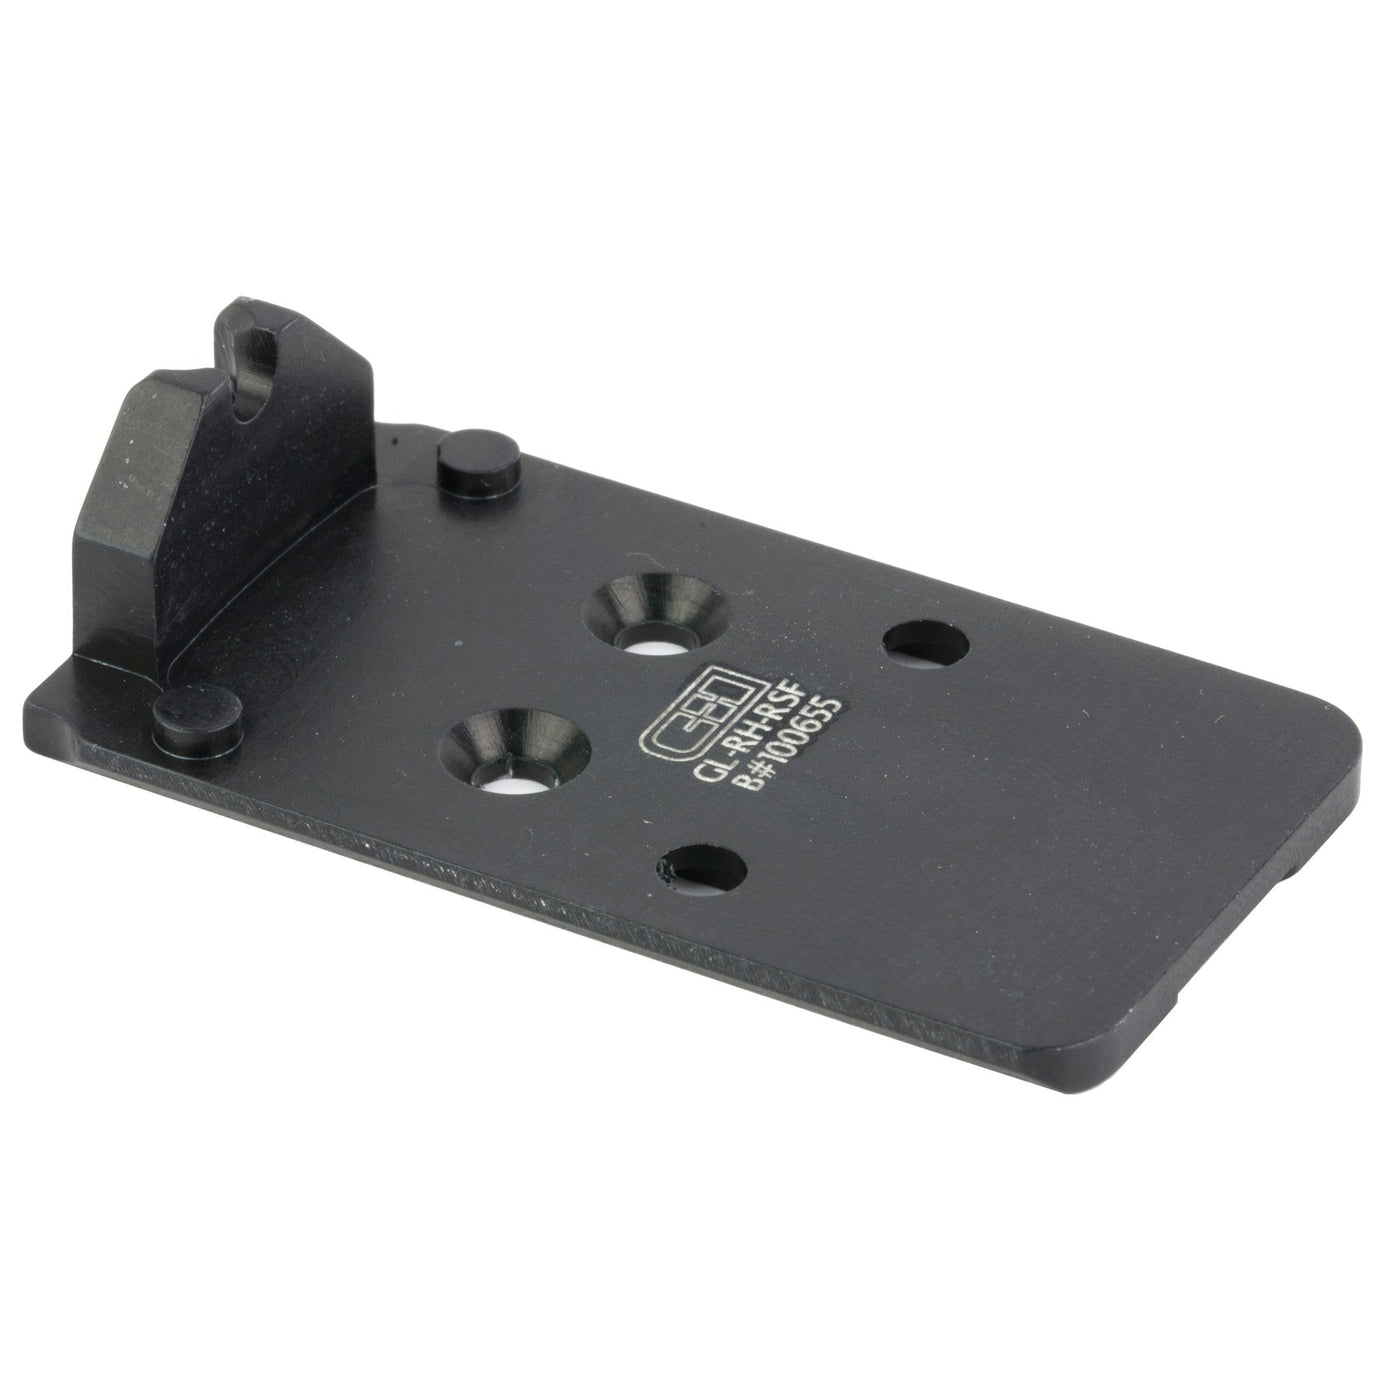 C&H Precision Weapons Chp For Glk Mos Adap Rmr/holo Scope Mounts